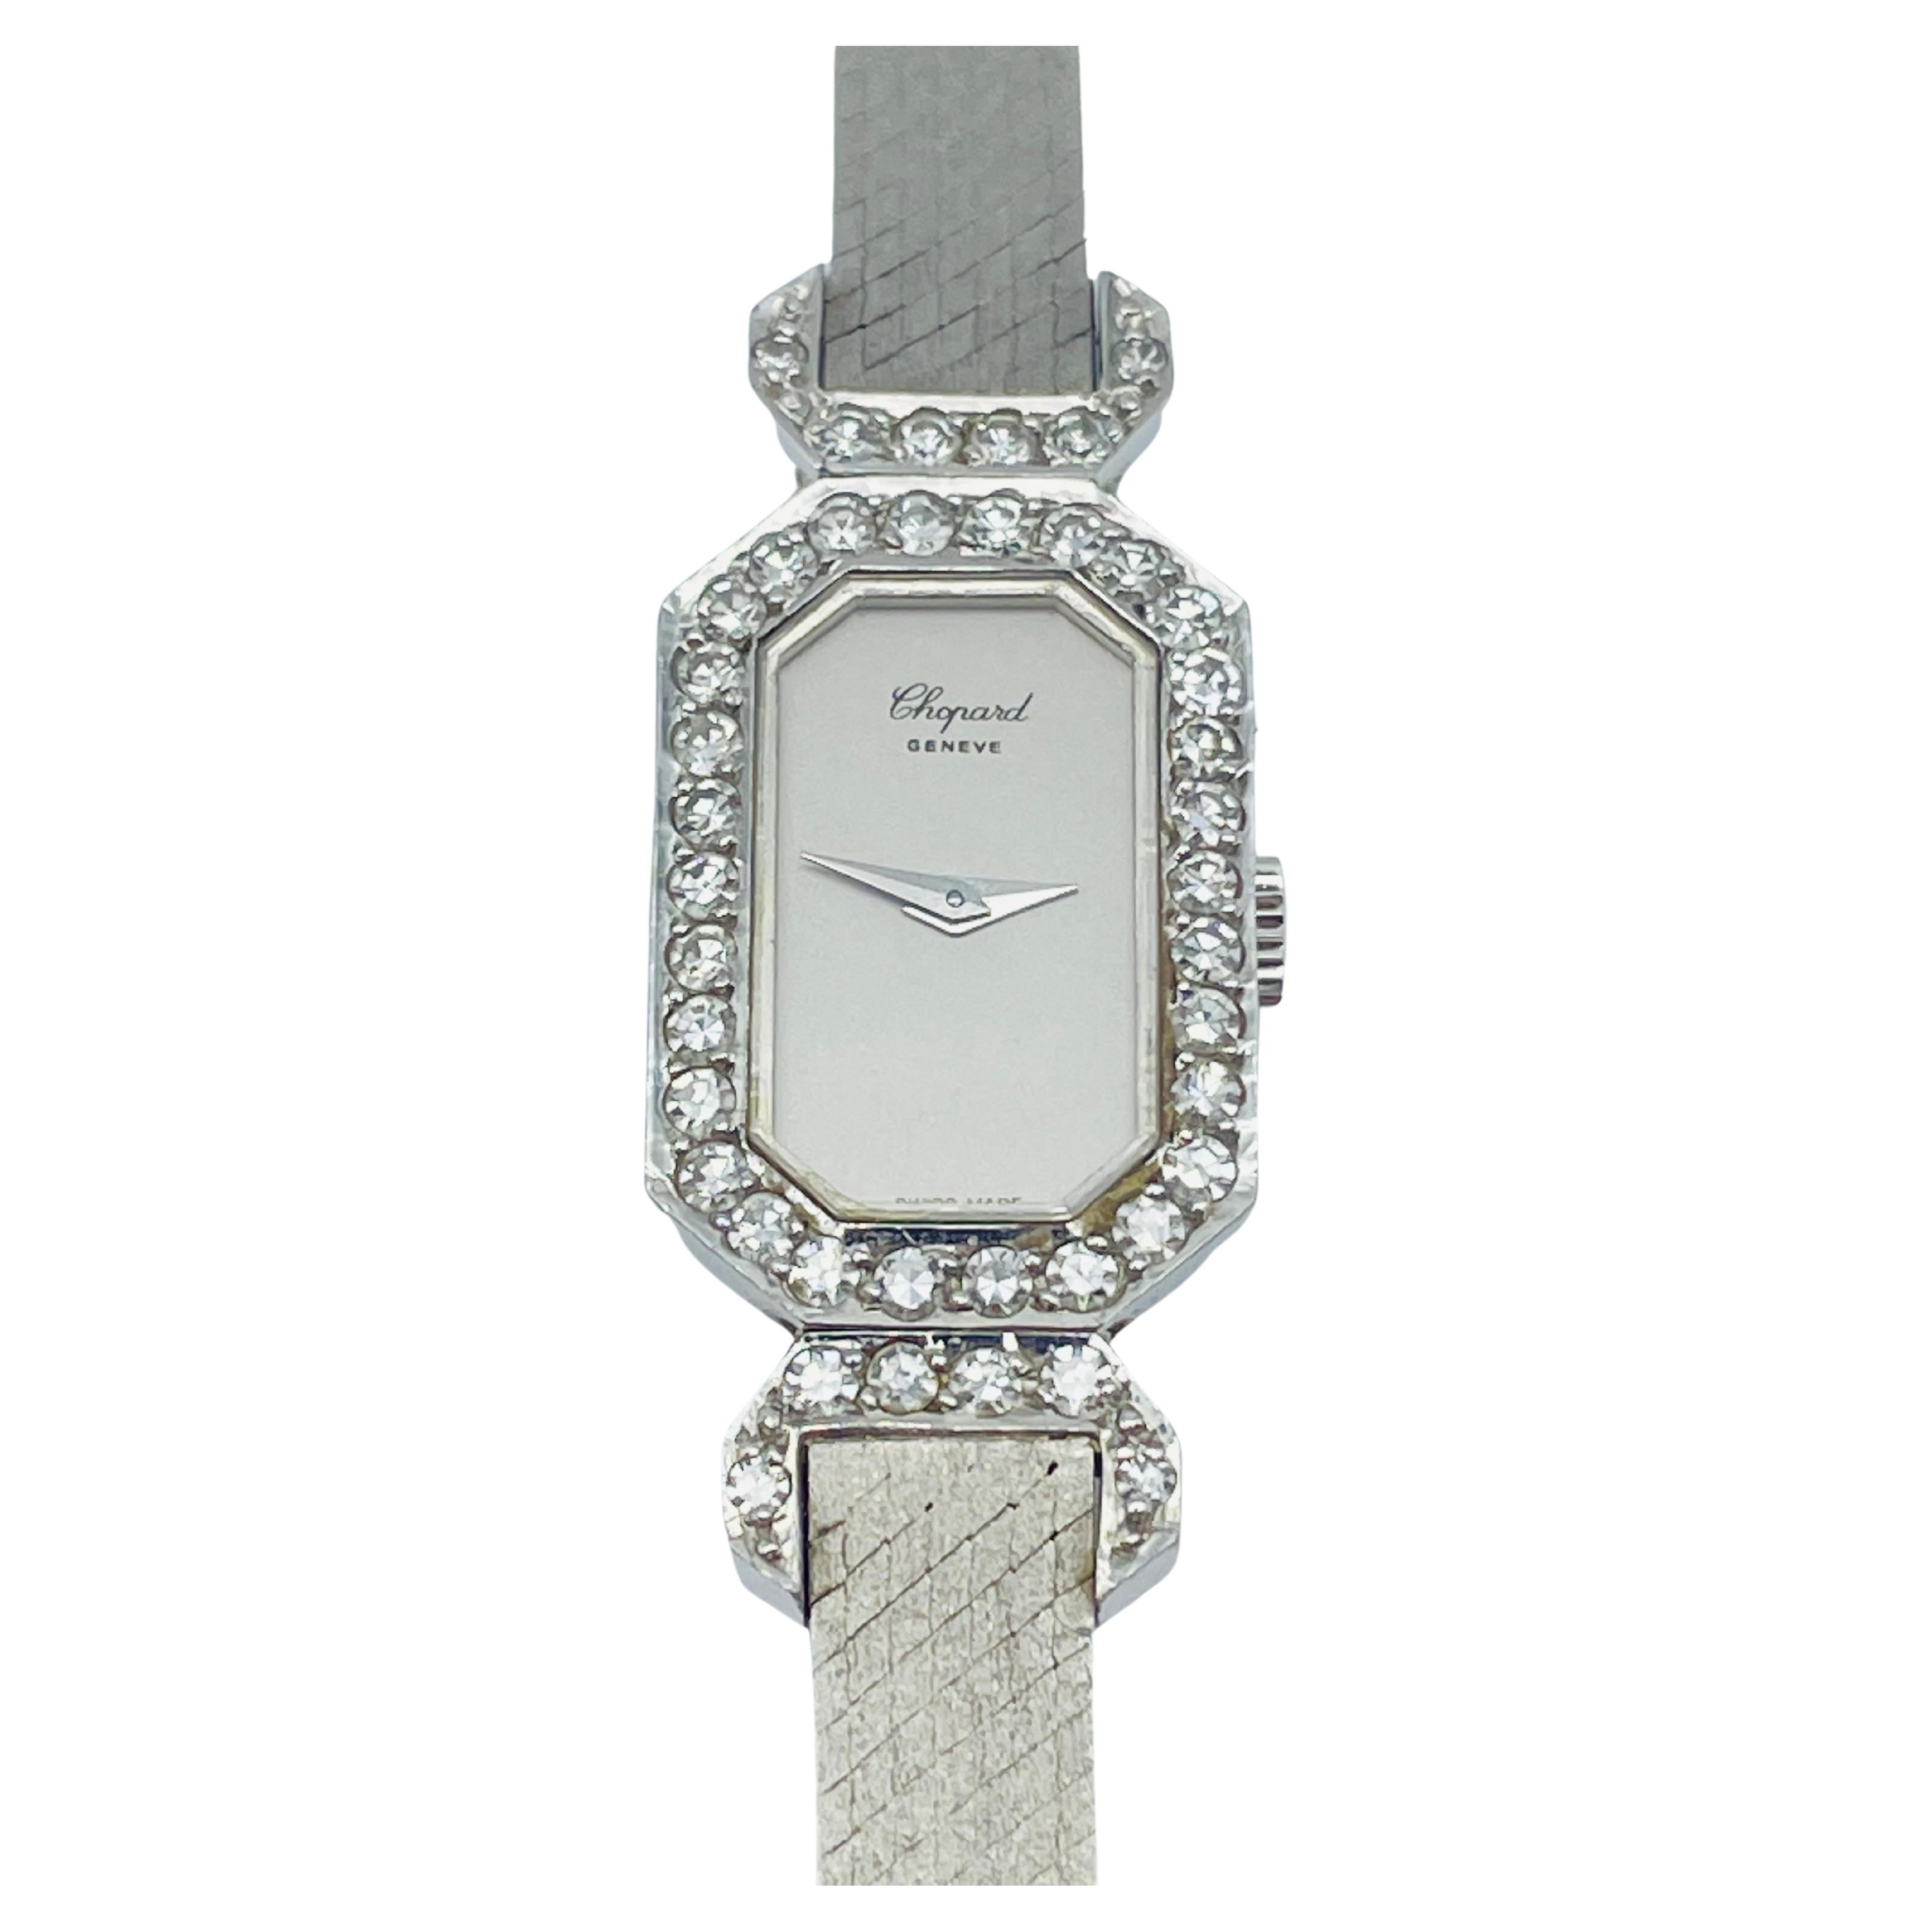 Vintage Chopard Geneve 18k White Gold Ladies' Watch with Diamonds For Sale